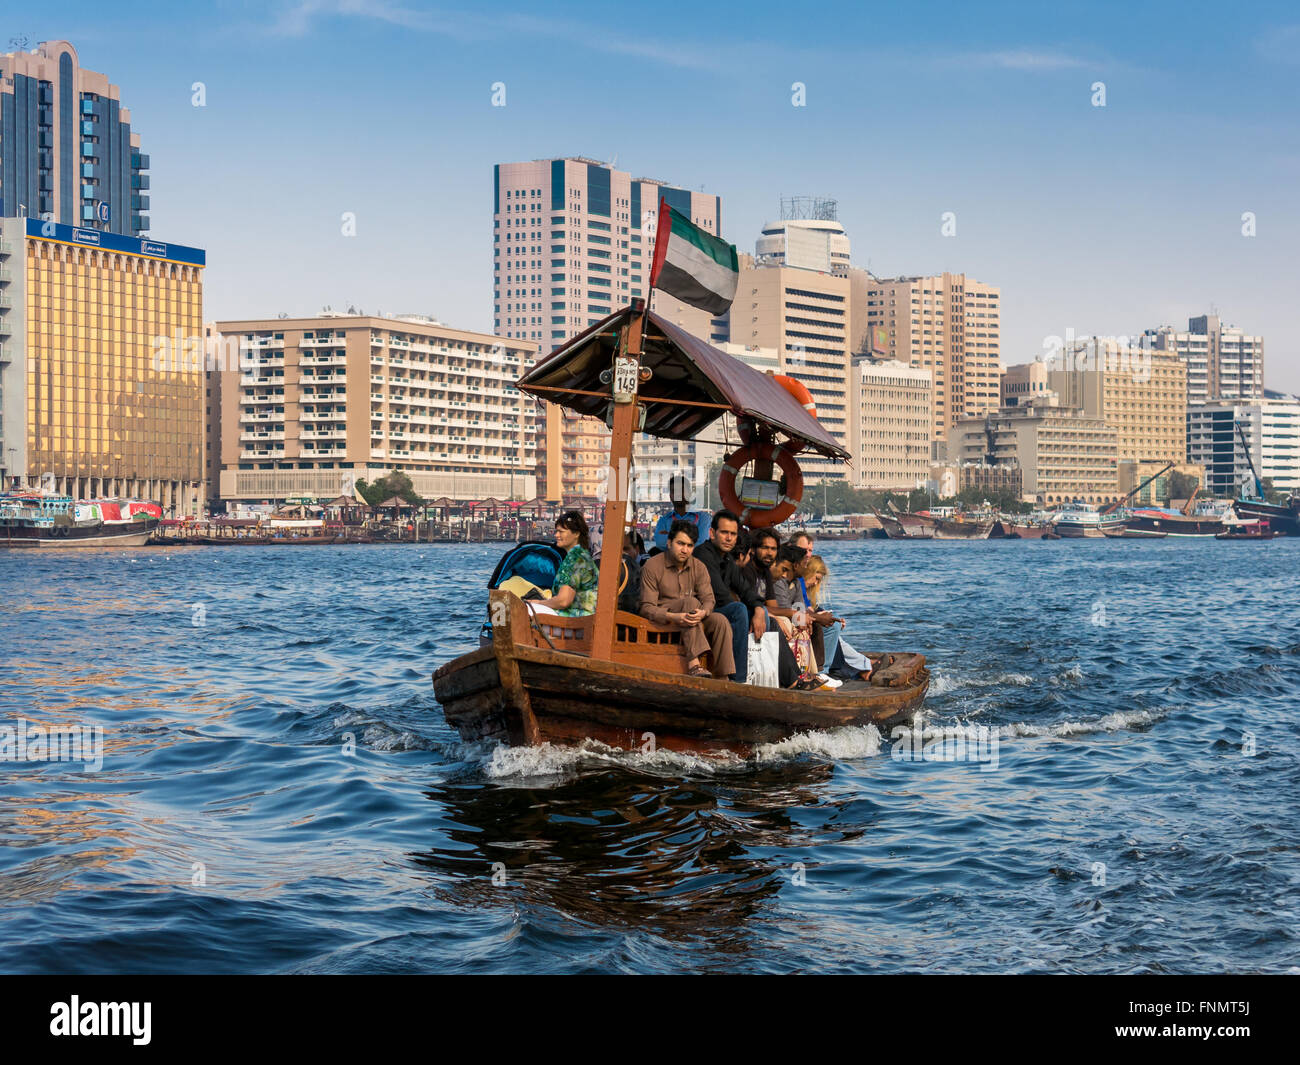 People crossing the Creek from Deira to Bur by abra, a traditional wooden water taxi in Dubai, United Arab Emirates Stock Photo